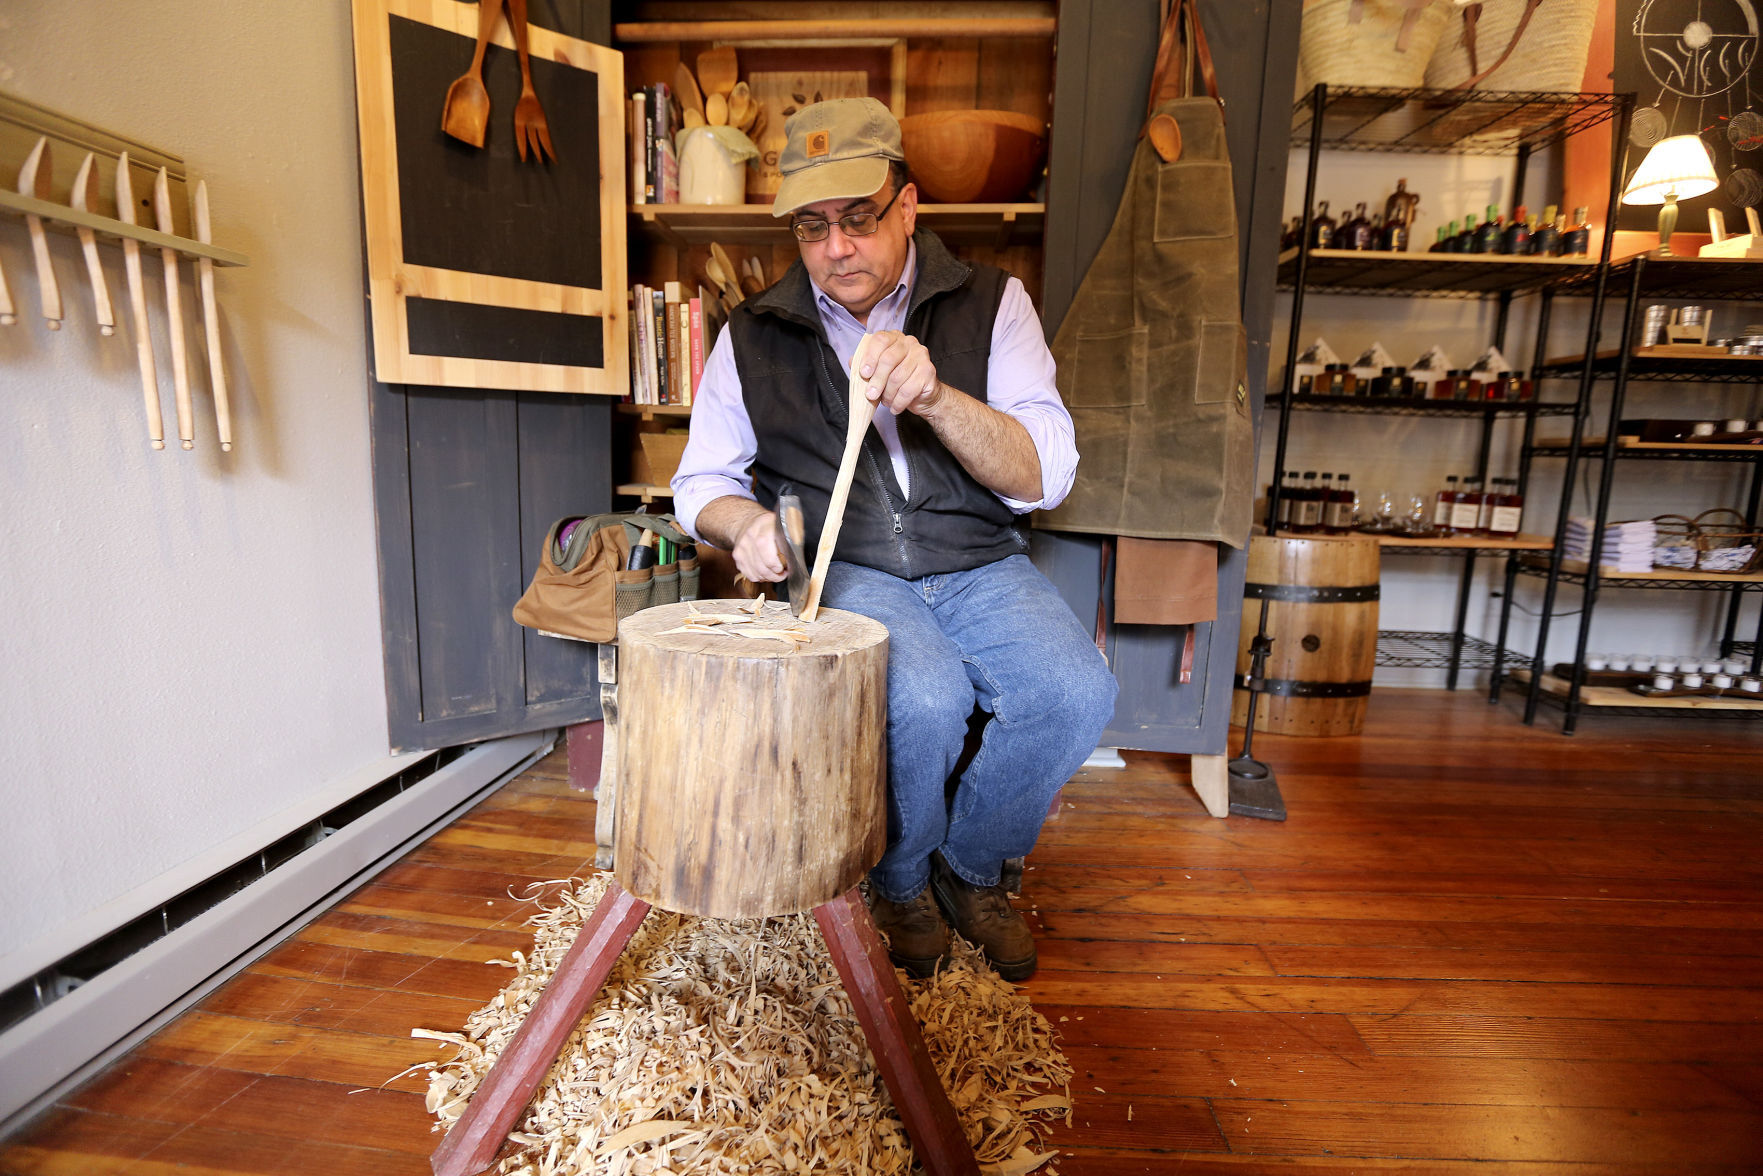 Paul Pendola, owner of Galena Spoon Co., demonstrates how a wooden spoon is carved at his store. PHOTO CREDIT: Dave Kettering